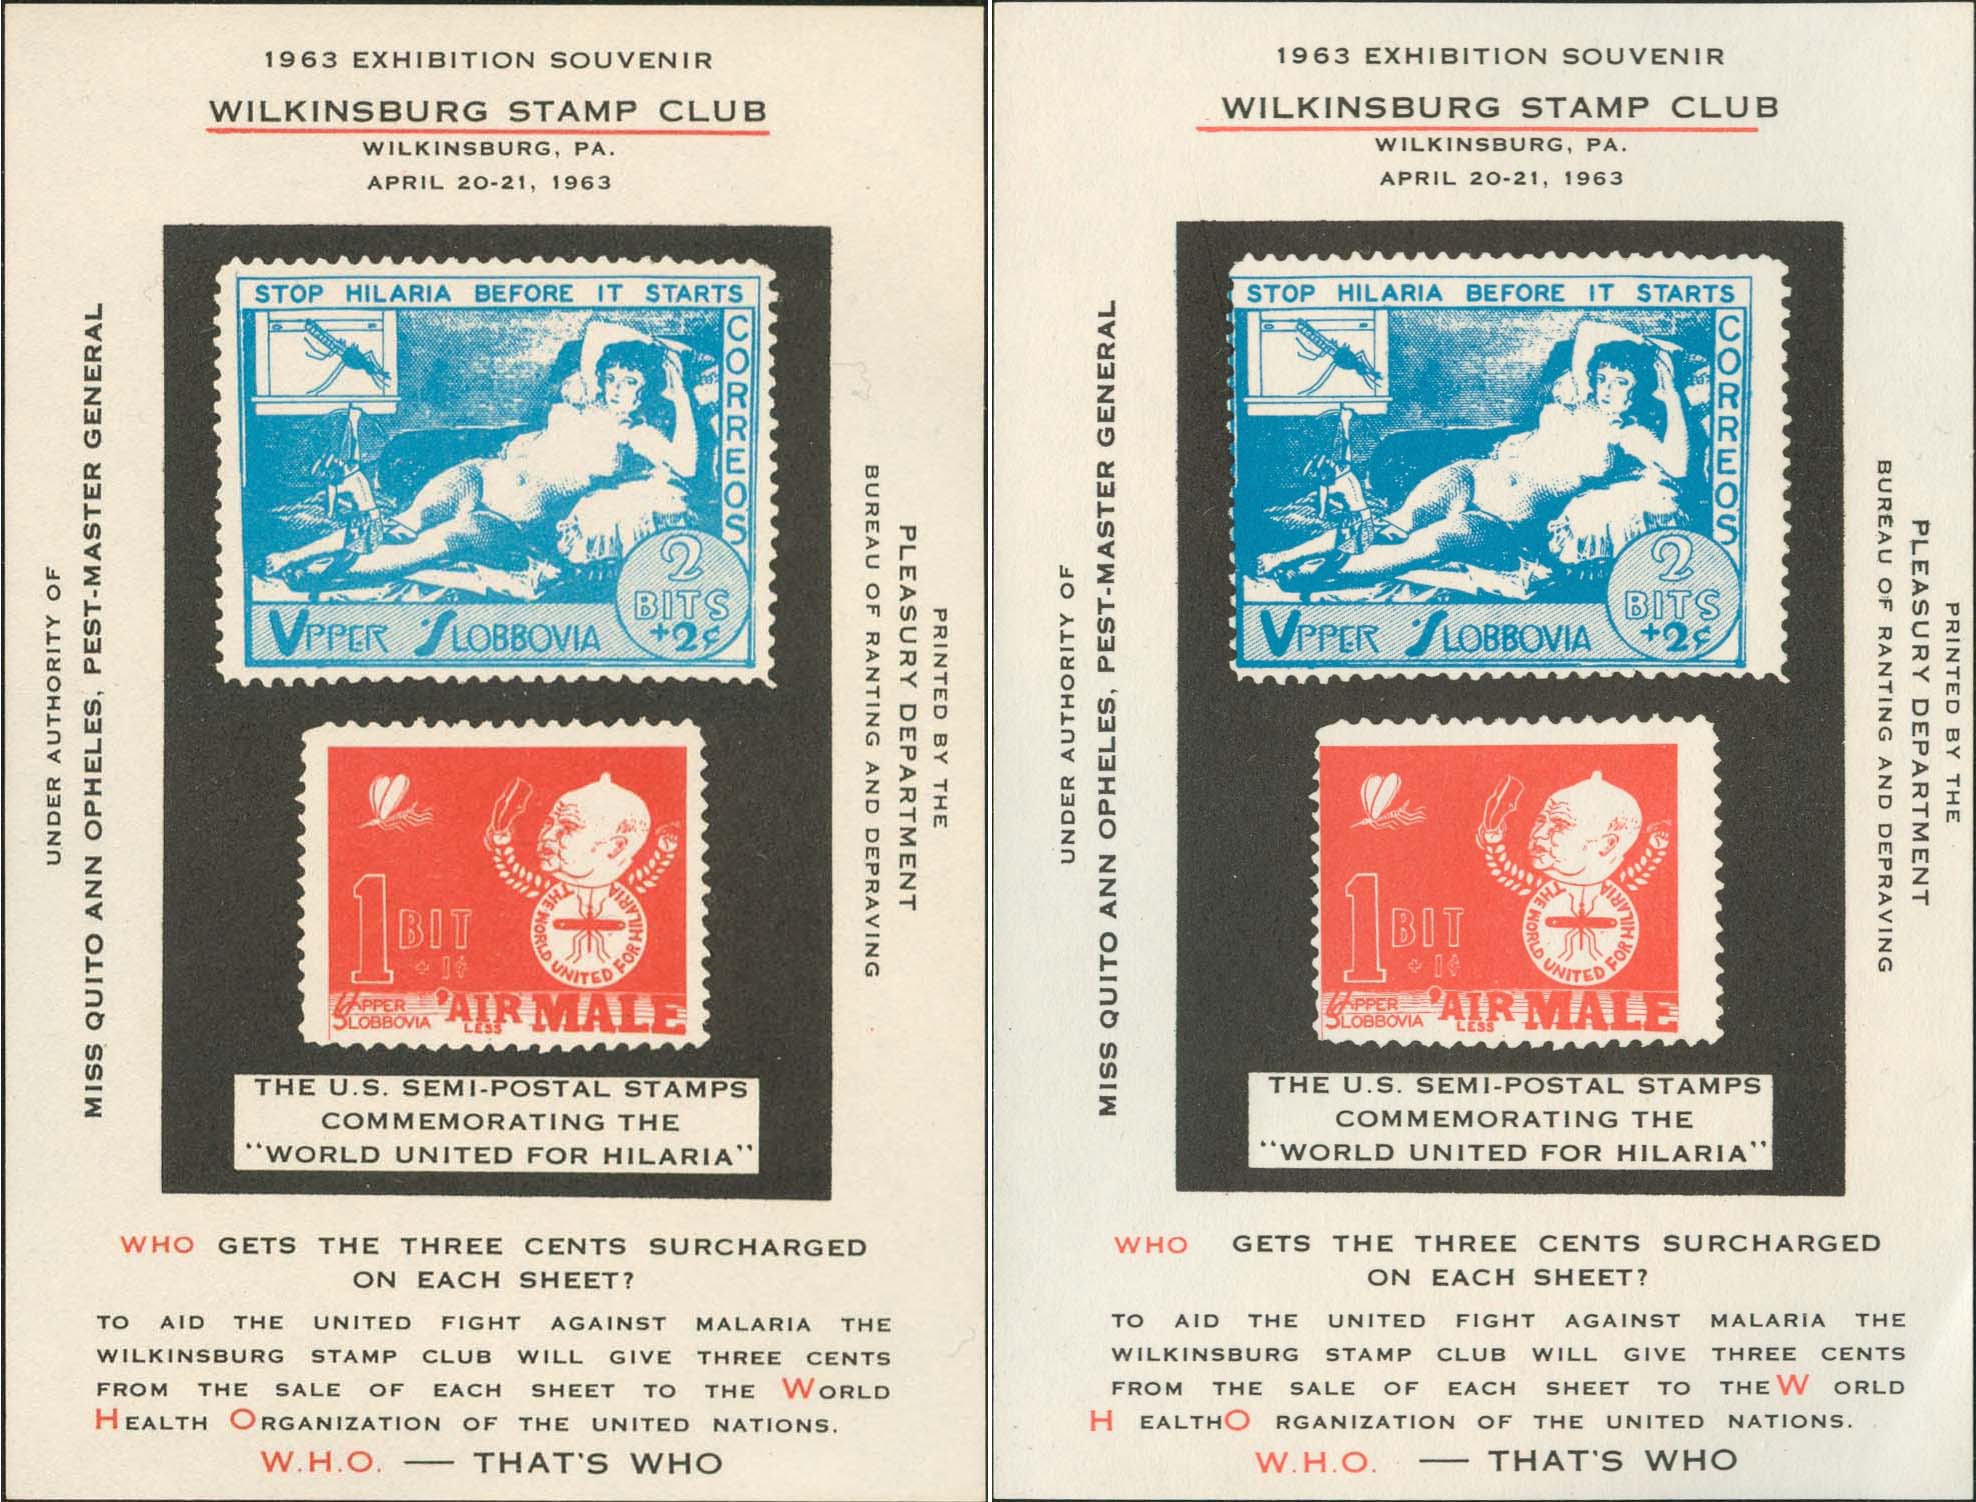 Wilkinsburg Stamp Club Souvenir Sheet - Normal And Red/Blue Shifted Left Side By Side Comparison